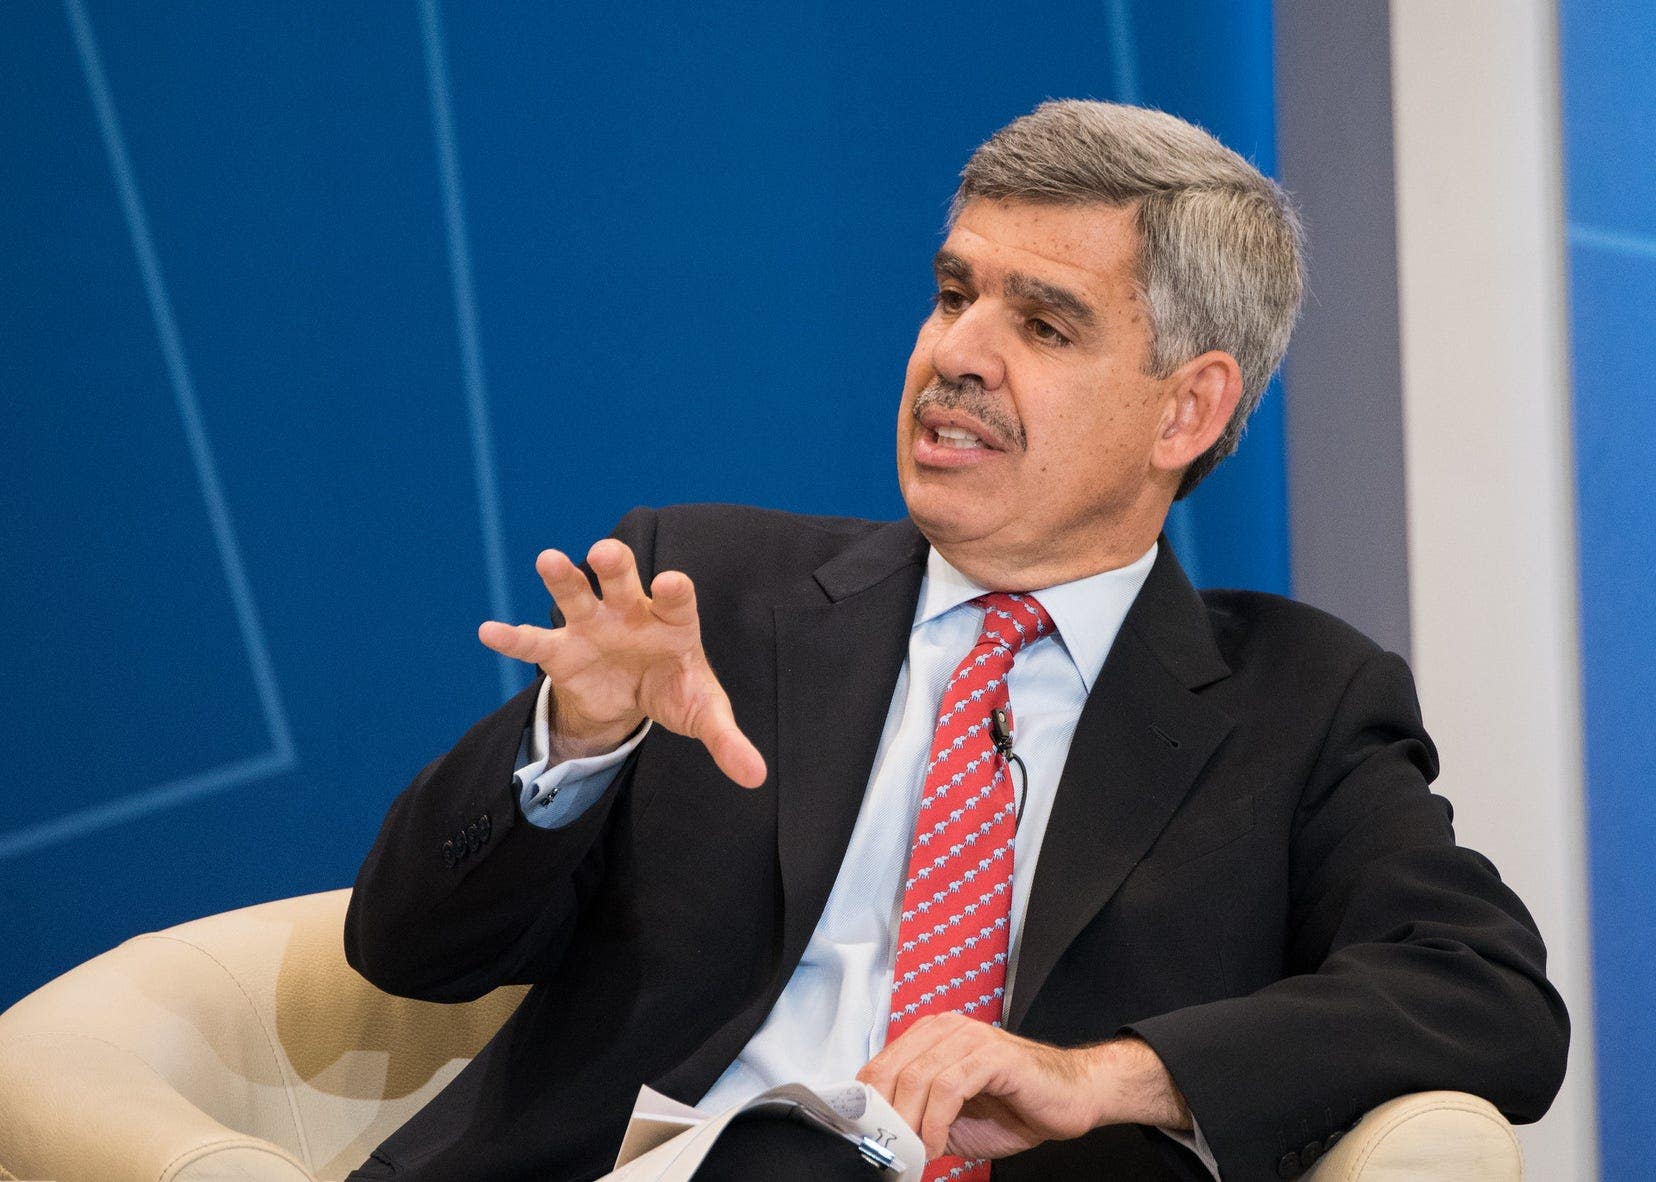 El-Erian Thinks Potential Fall In December Headline Inflation Won't Signal End Of Price-Rise Problem